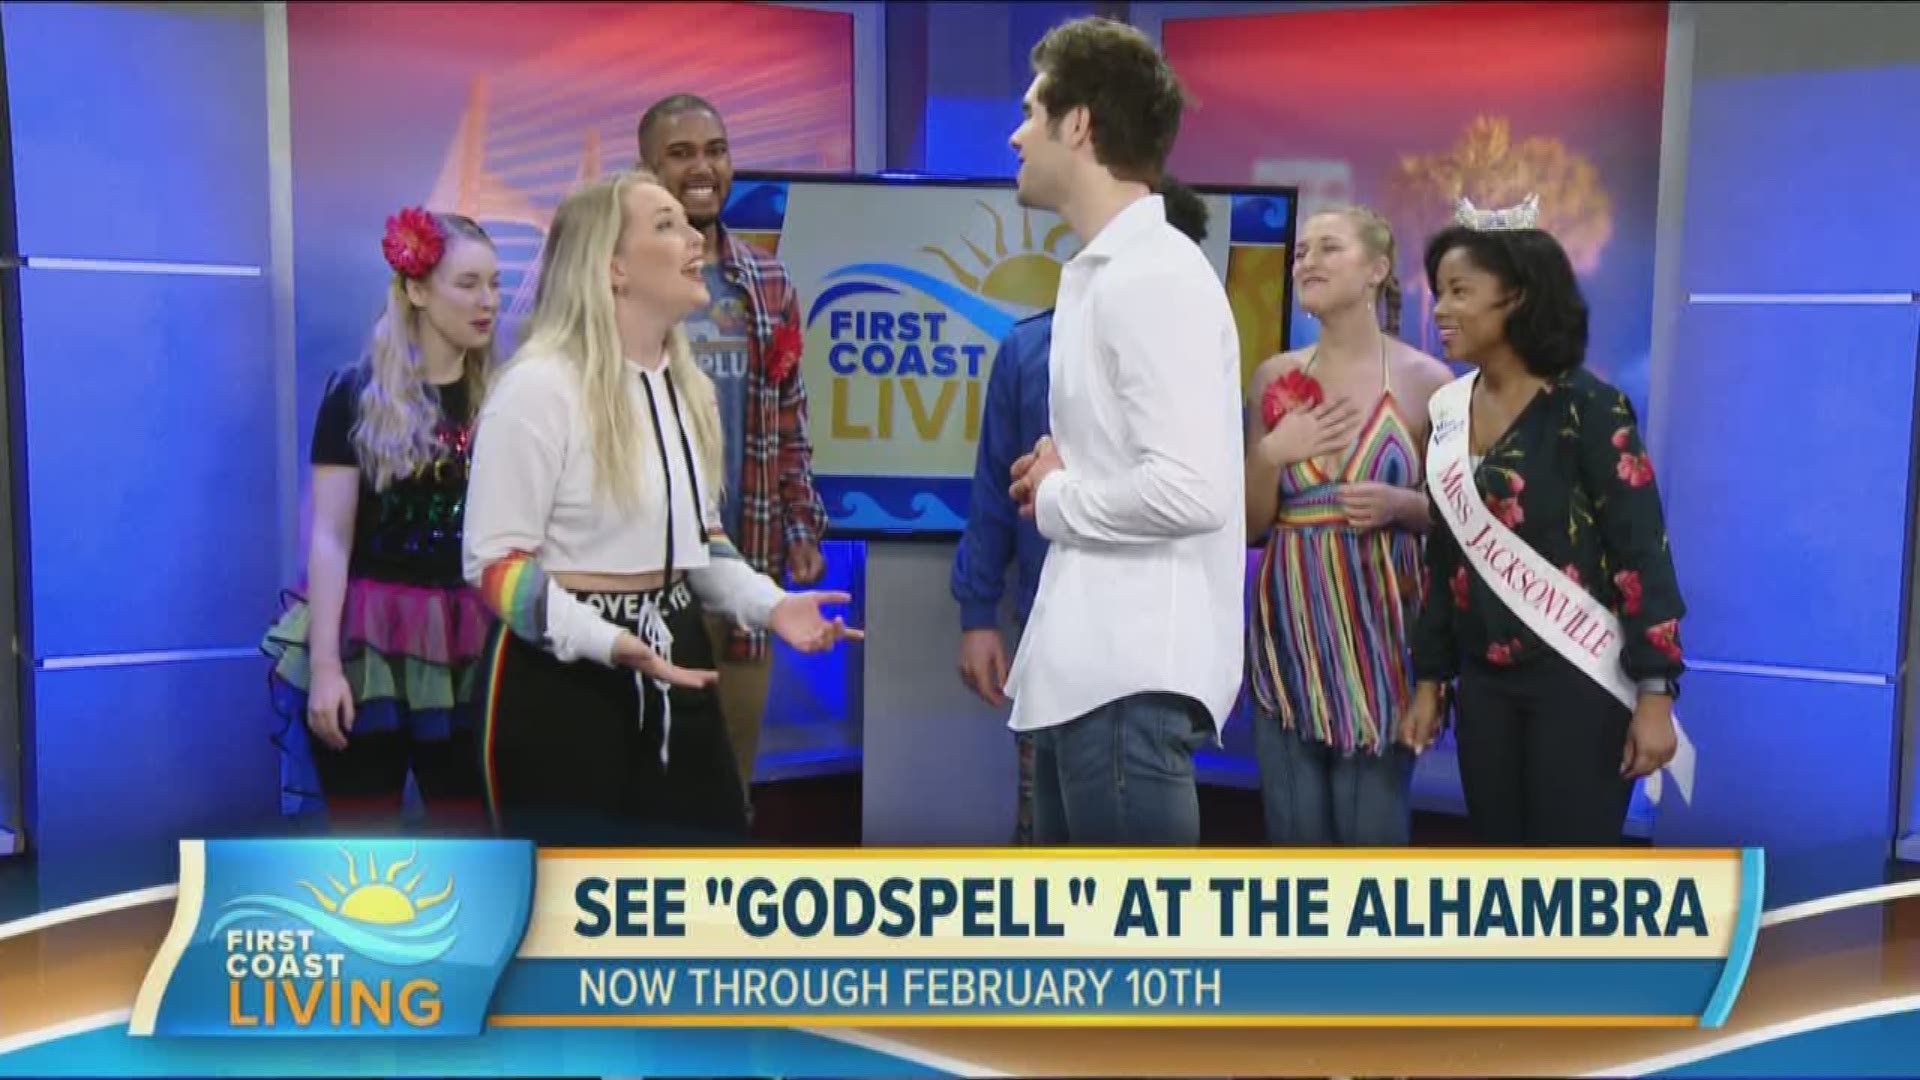 Alhambra Theatre introduces musical 'Godspell' to kick off new season.